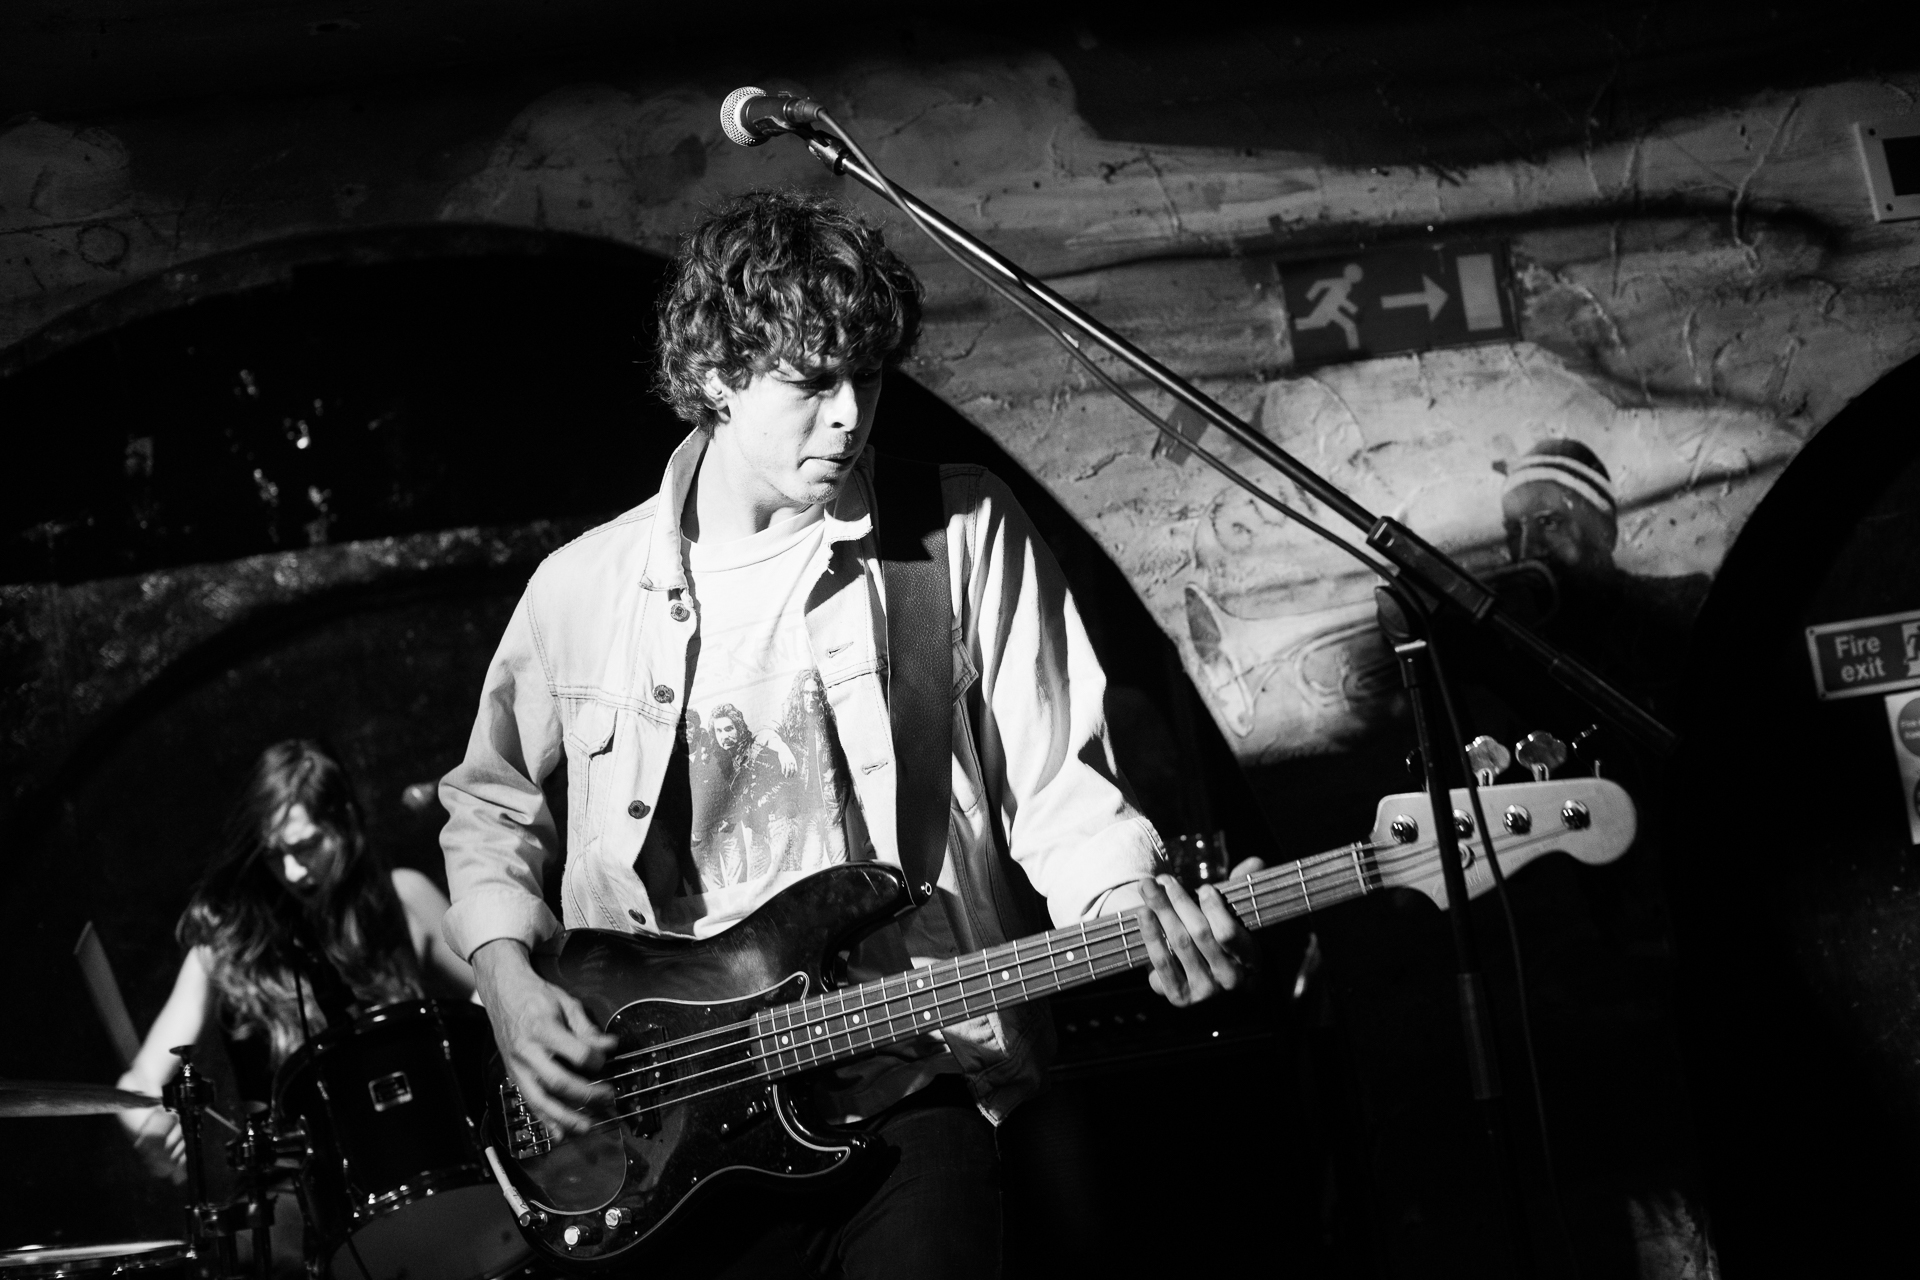 the young man is playing his bass in front of a microphone